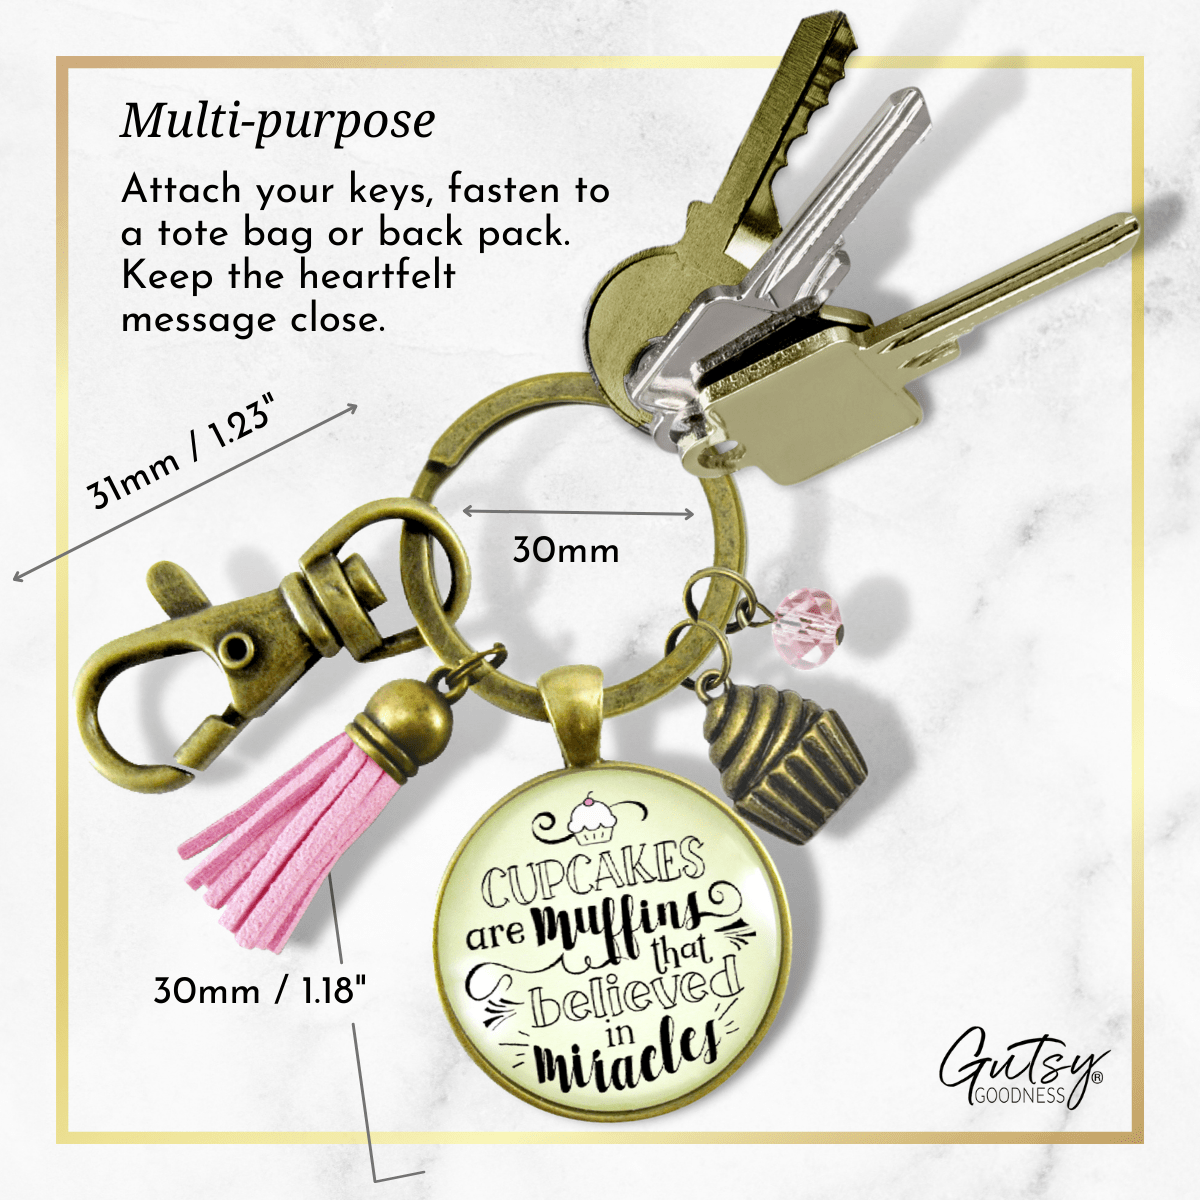 Cupcake Keychain Muffins Believed Miracles Baker Life Cake Jewelry - Gutsy Goodness